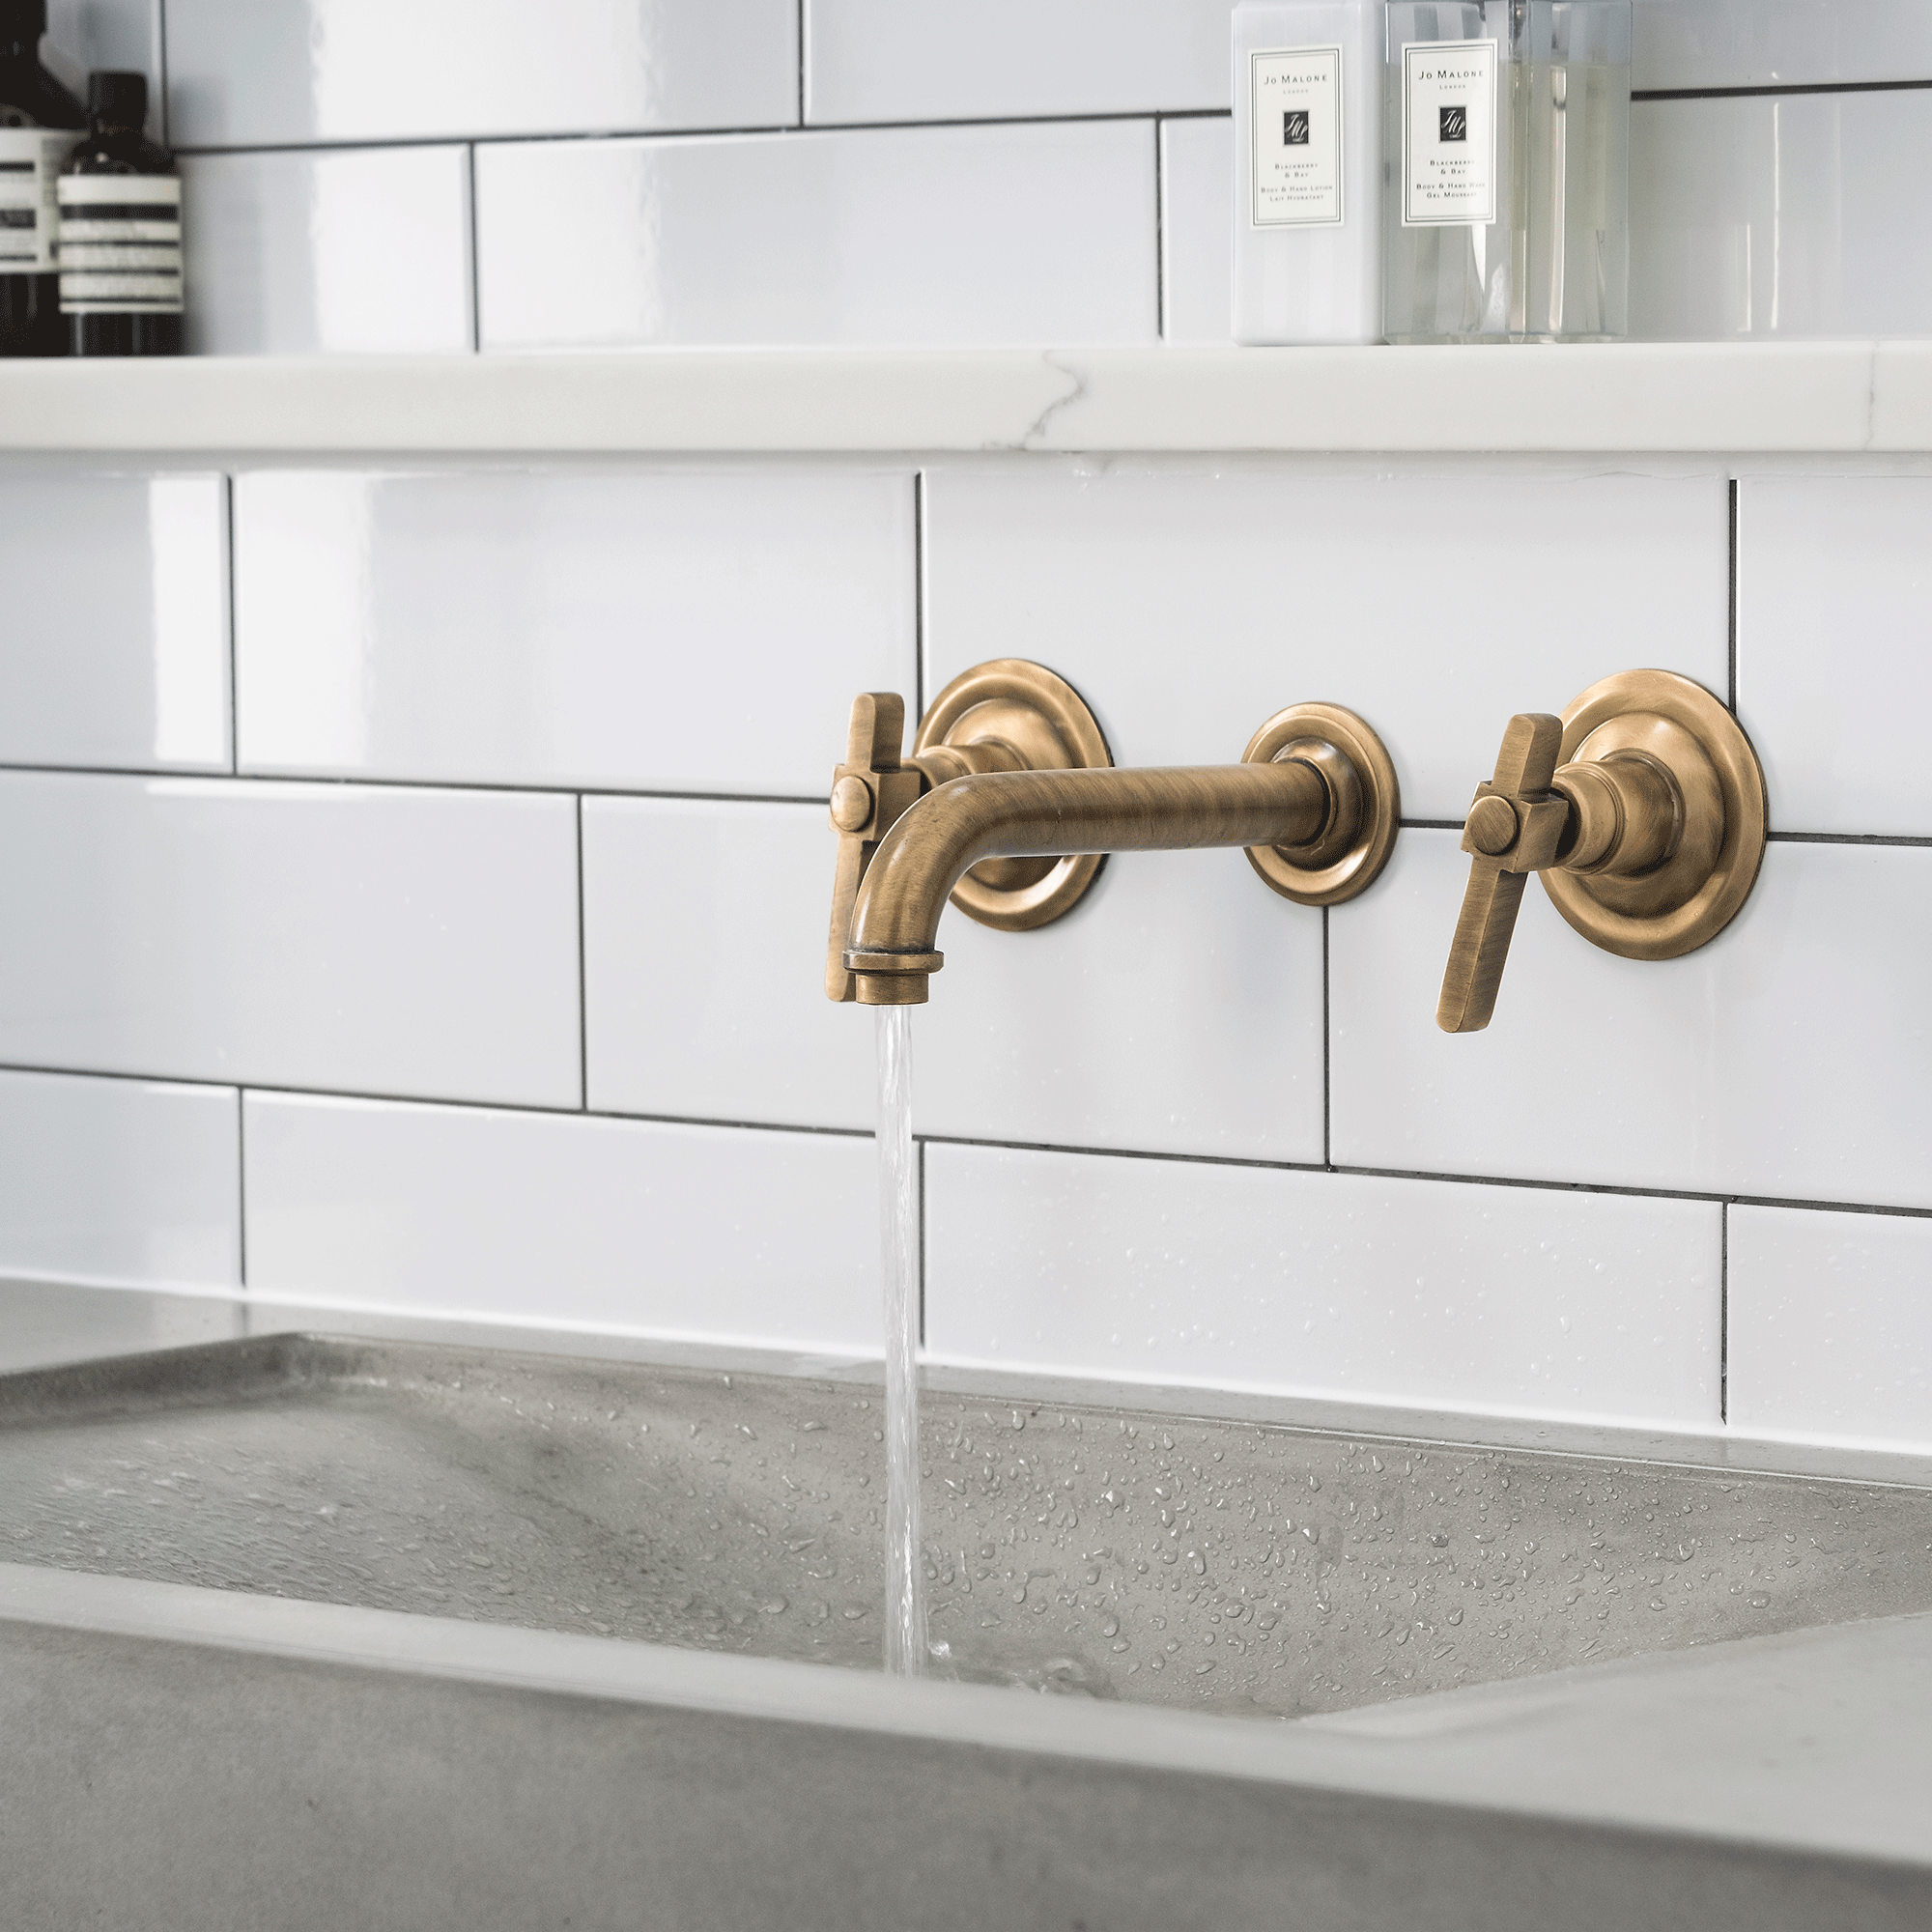 Concrete sink with white tiles and gold taps